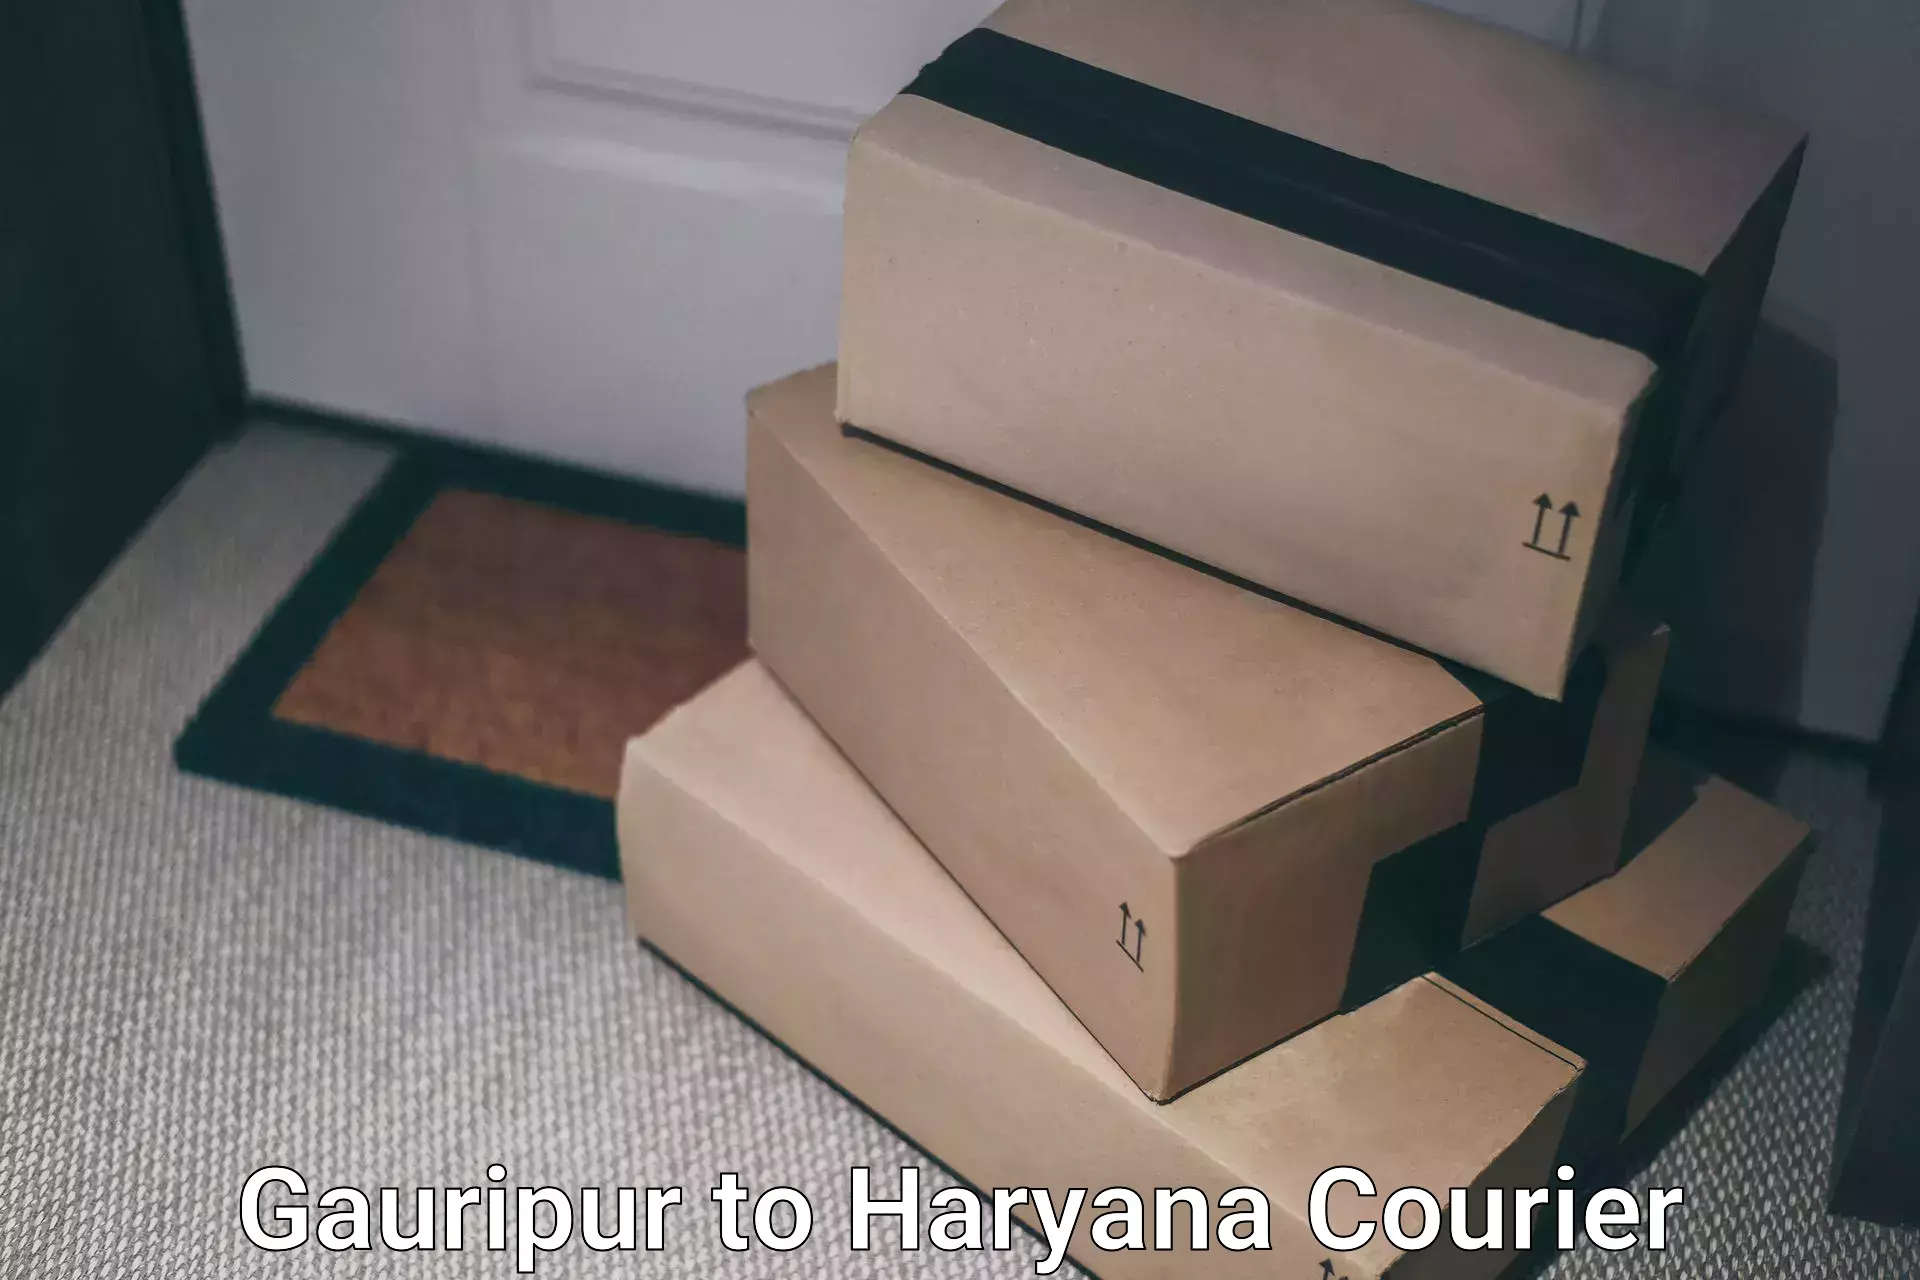 Same-day delivery solutions Gauripur to IIIT Sonepat